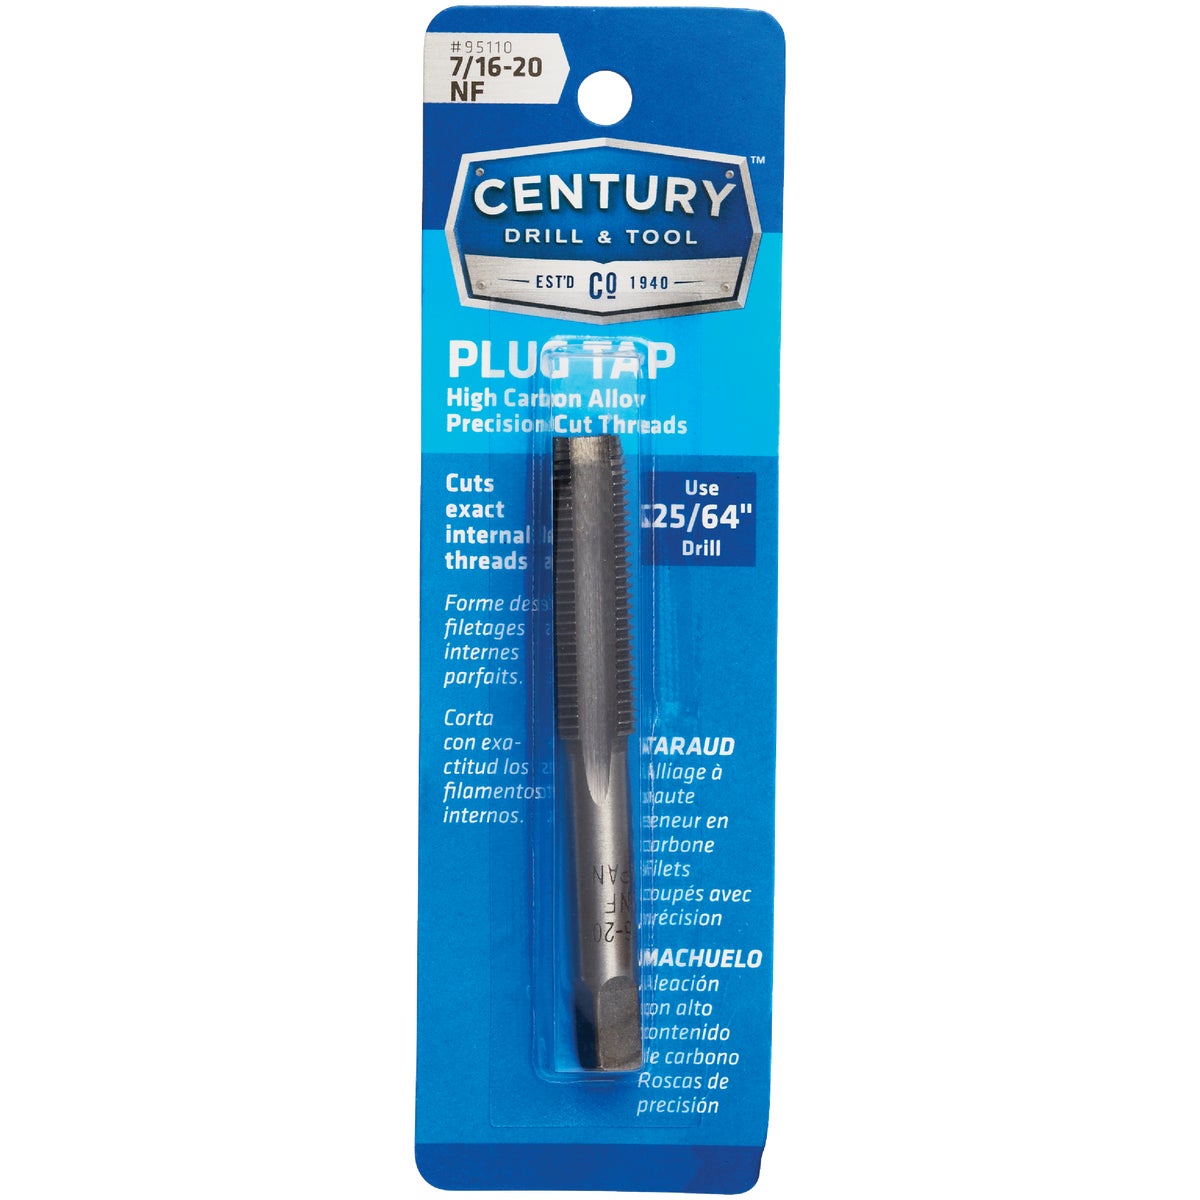 Century Drill & Tool 7/16-20 Carbon Steel National Fine Tap-Plug